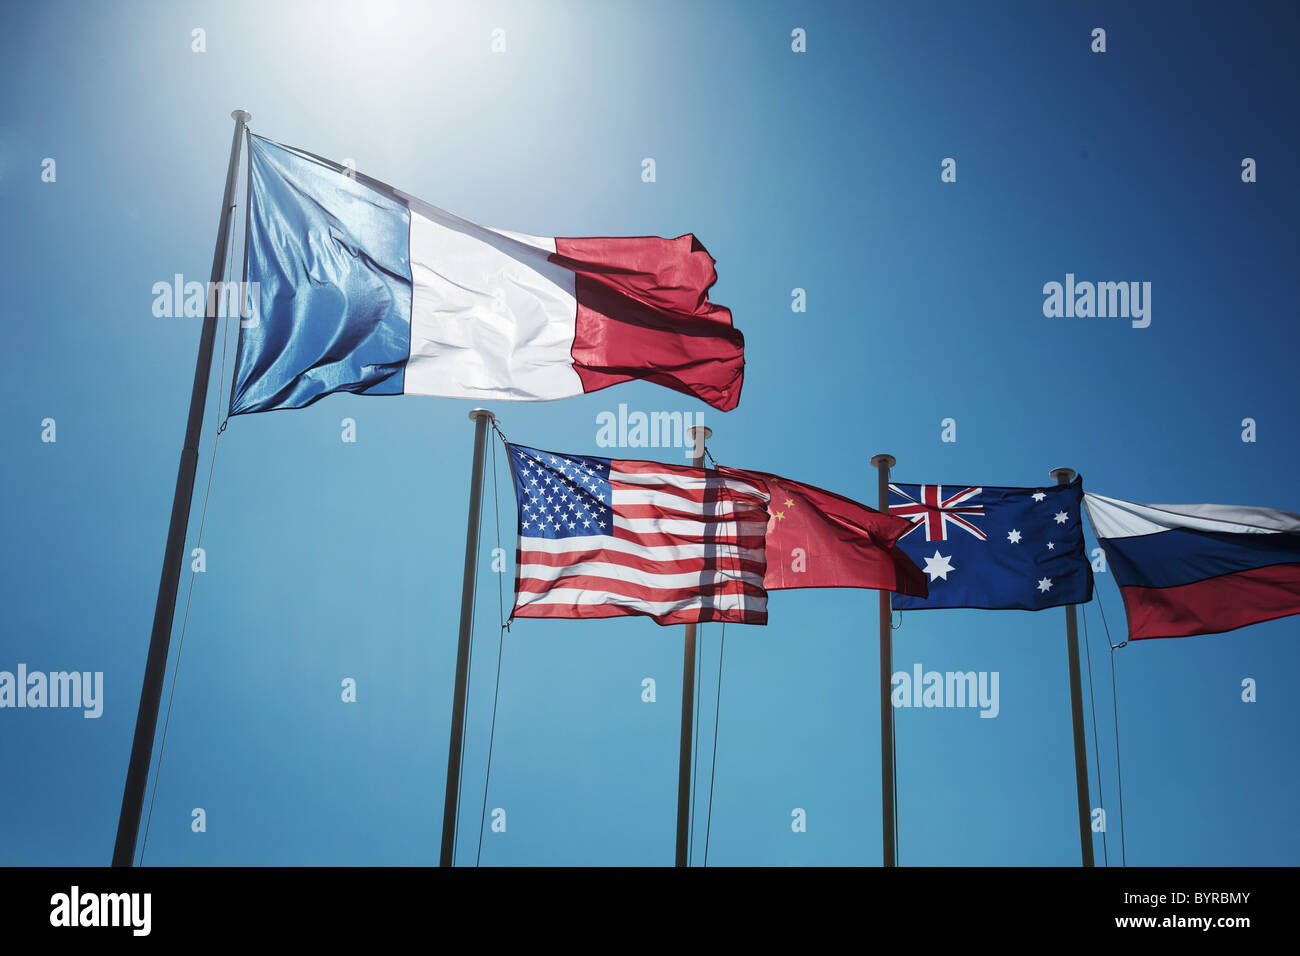 Image of different nations flags, cote de zur, nice, Monaco, displayed along side each other on flag poles. Stock Photo